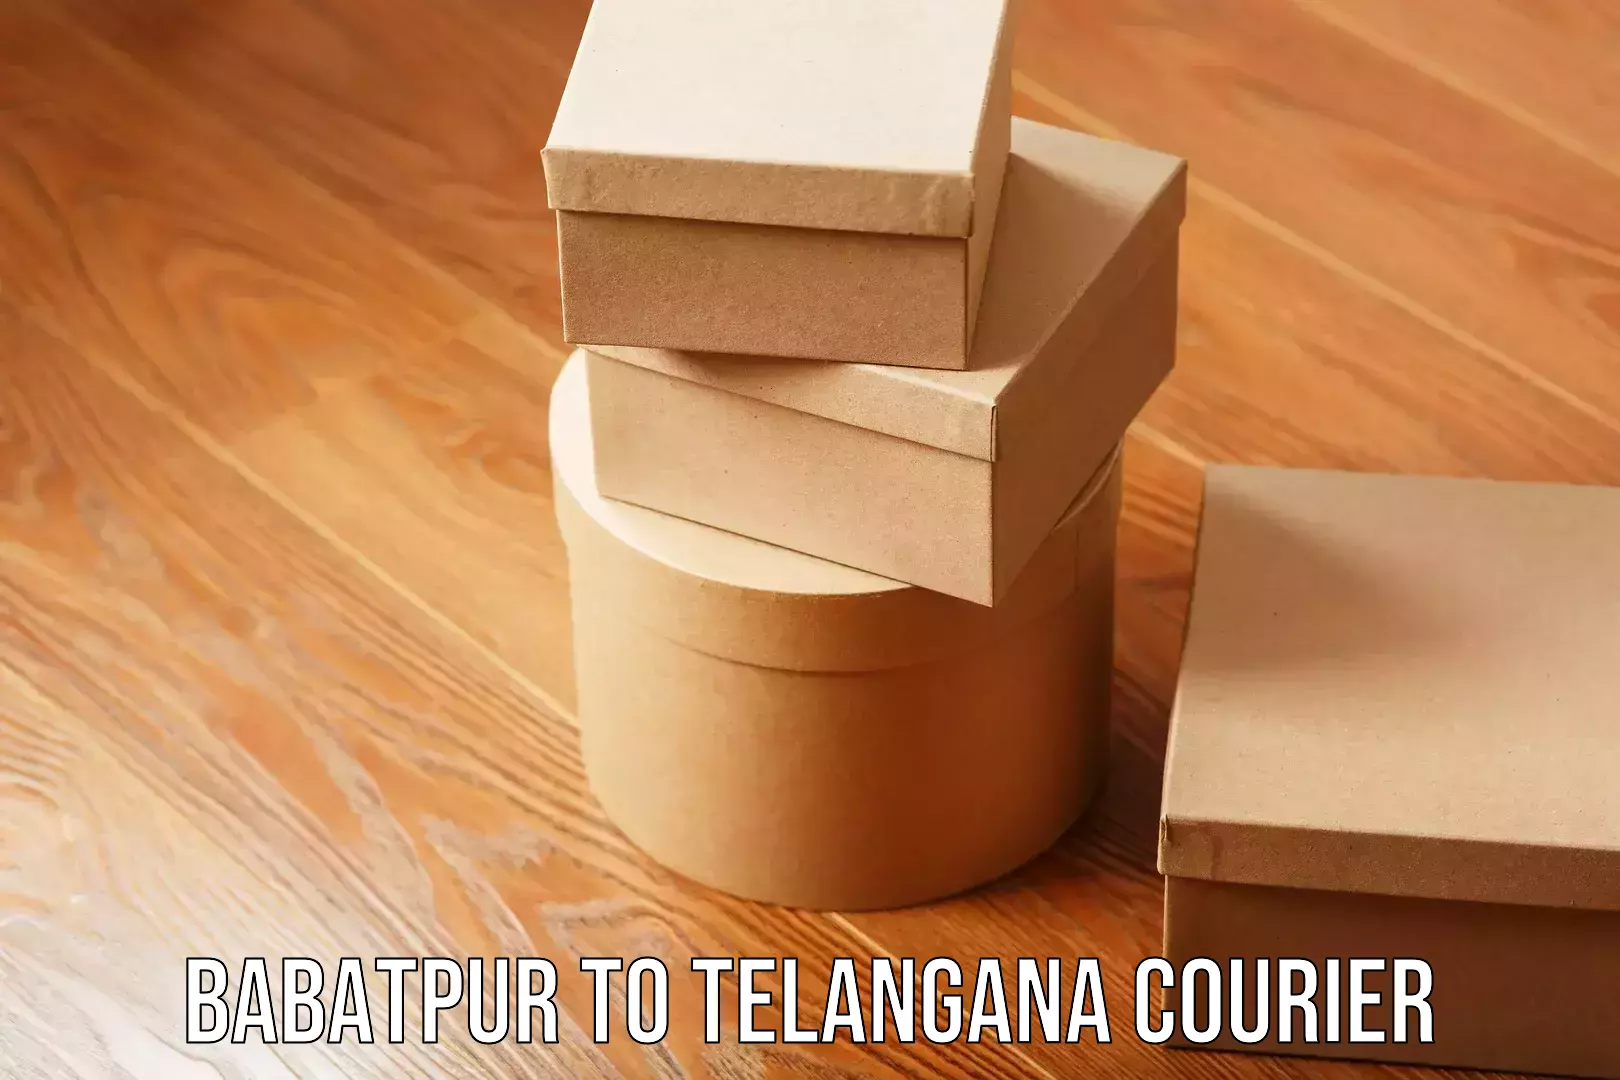 Parcel service for businesses Babatpur to Telangana